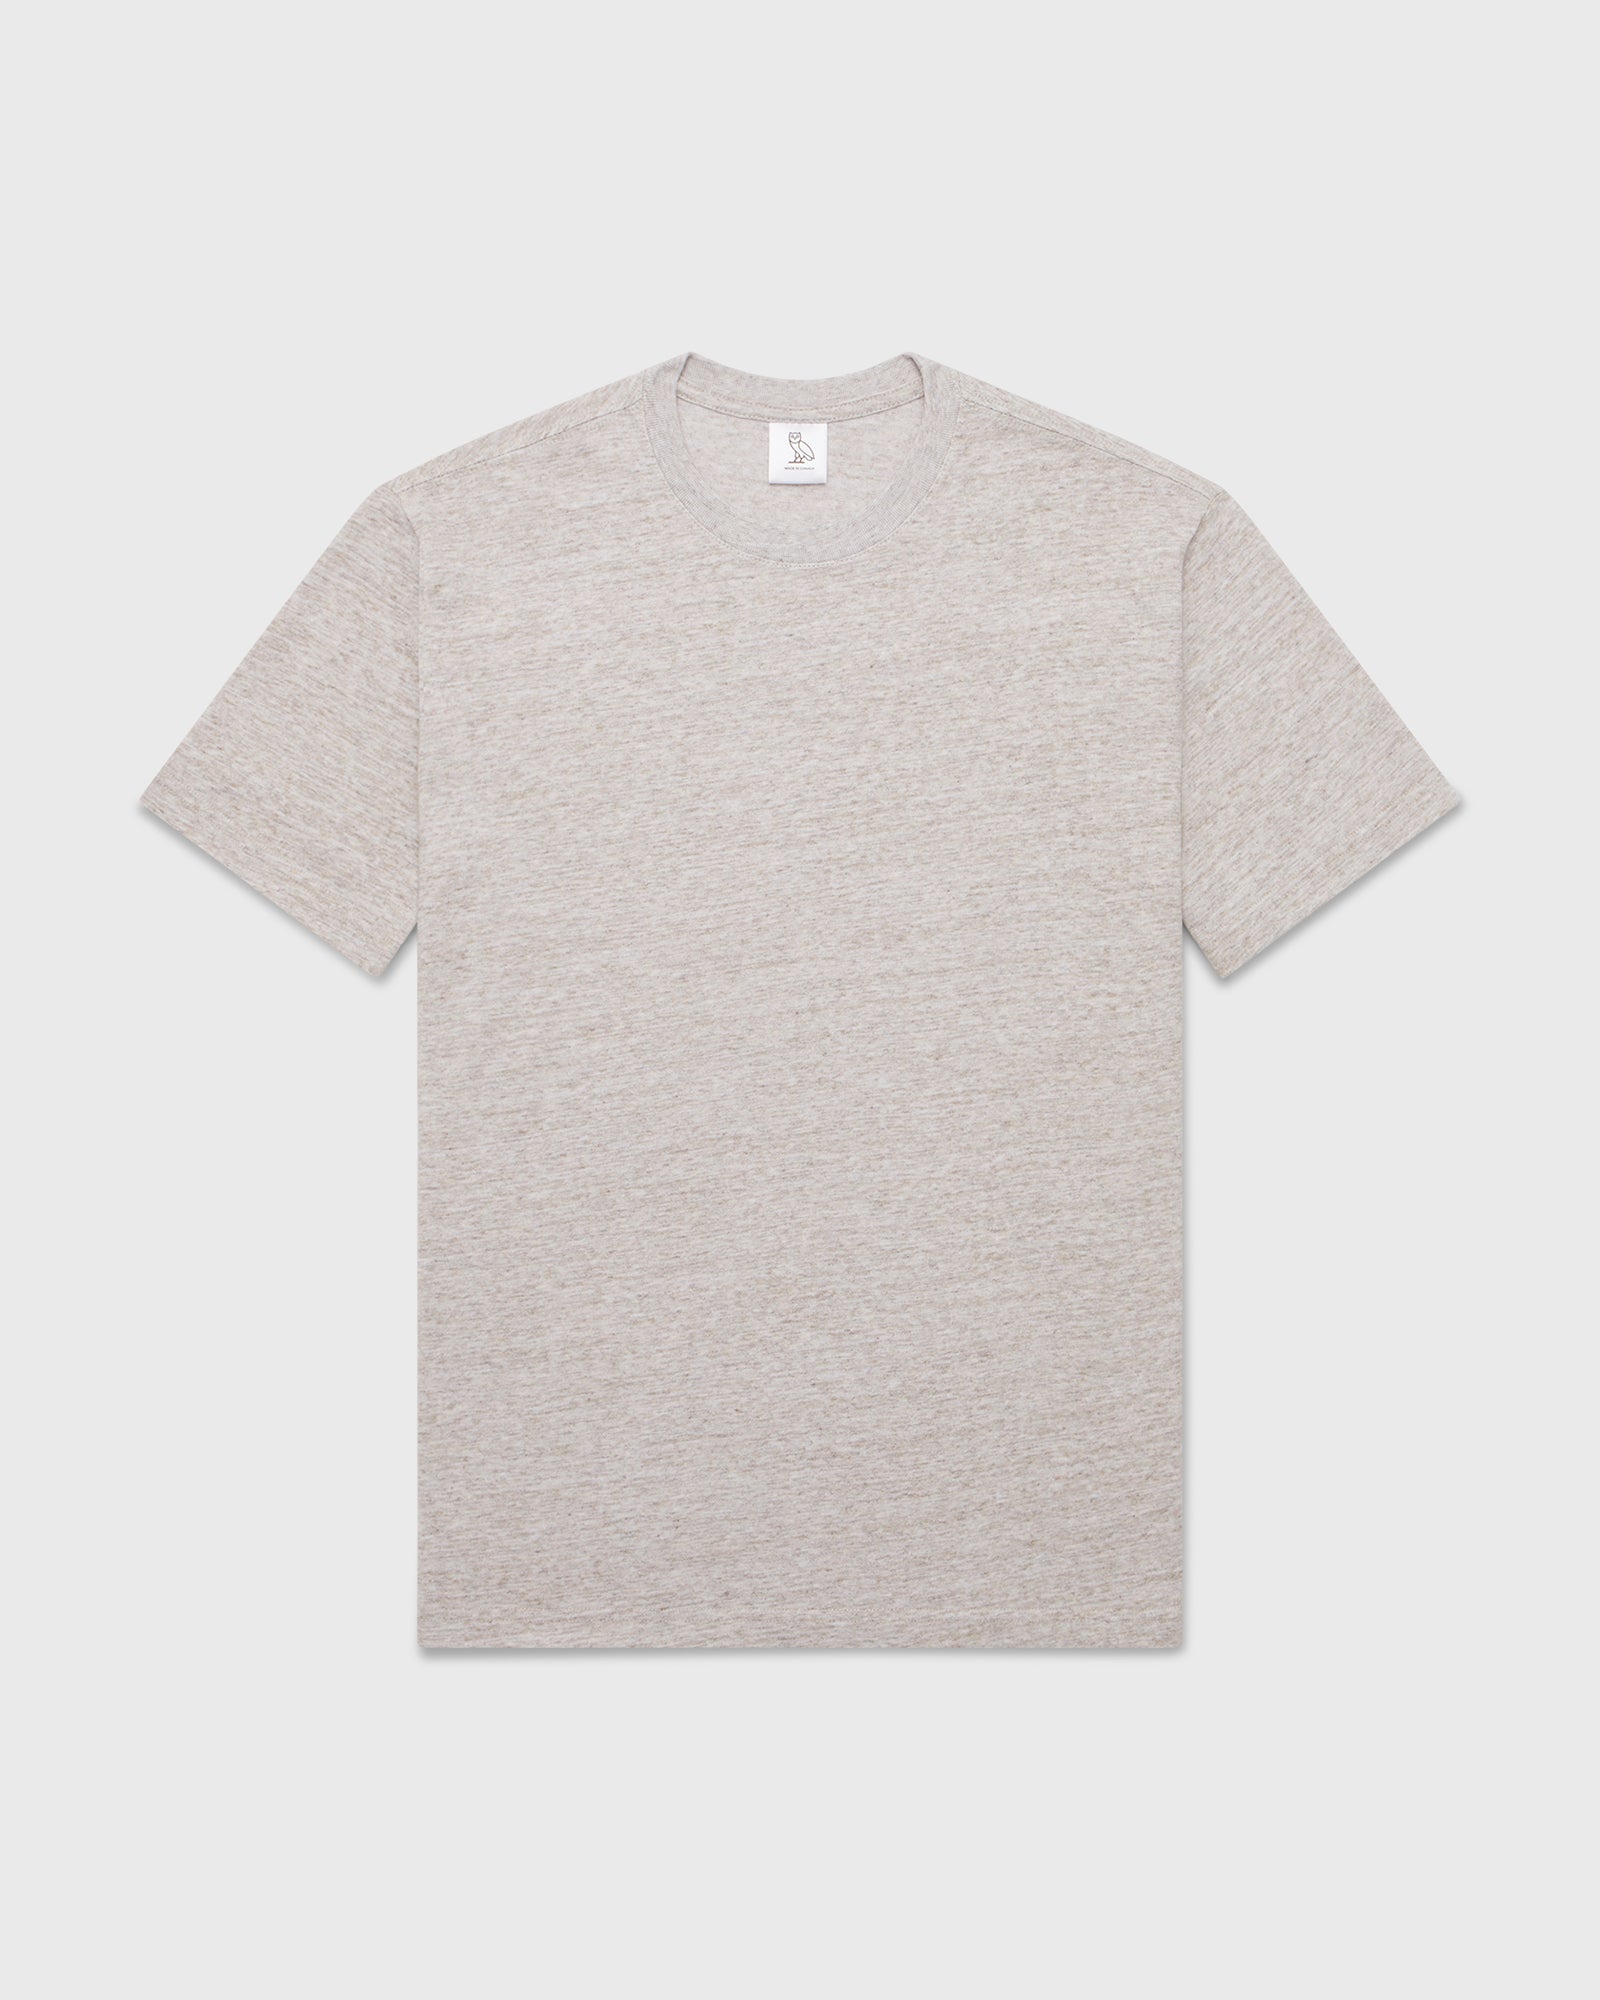 Speckle T-Shirt - Oatmeal IMAGE #1